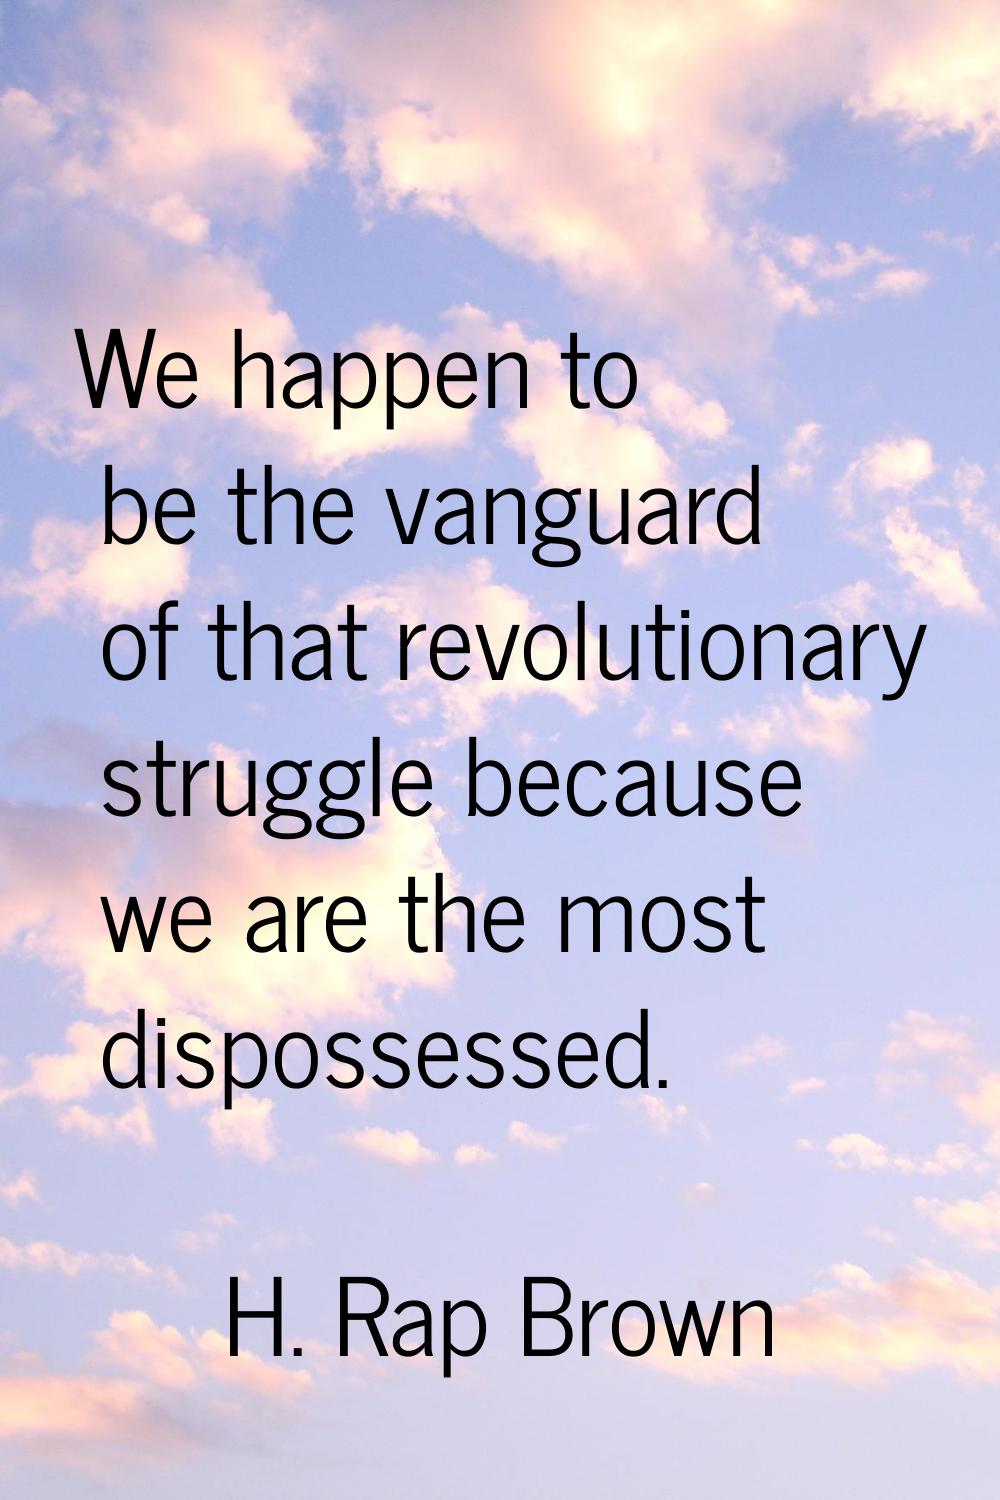 We happen to be the vanguard of that revolutionary struggle because we are the most dispossessed.